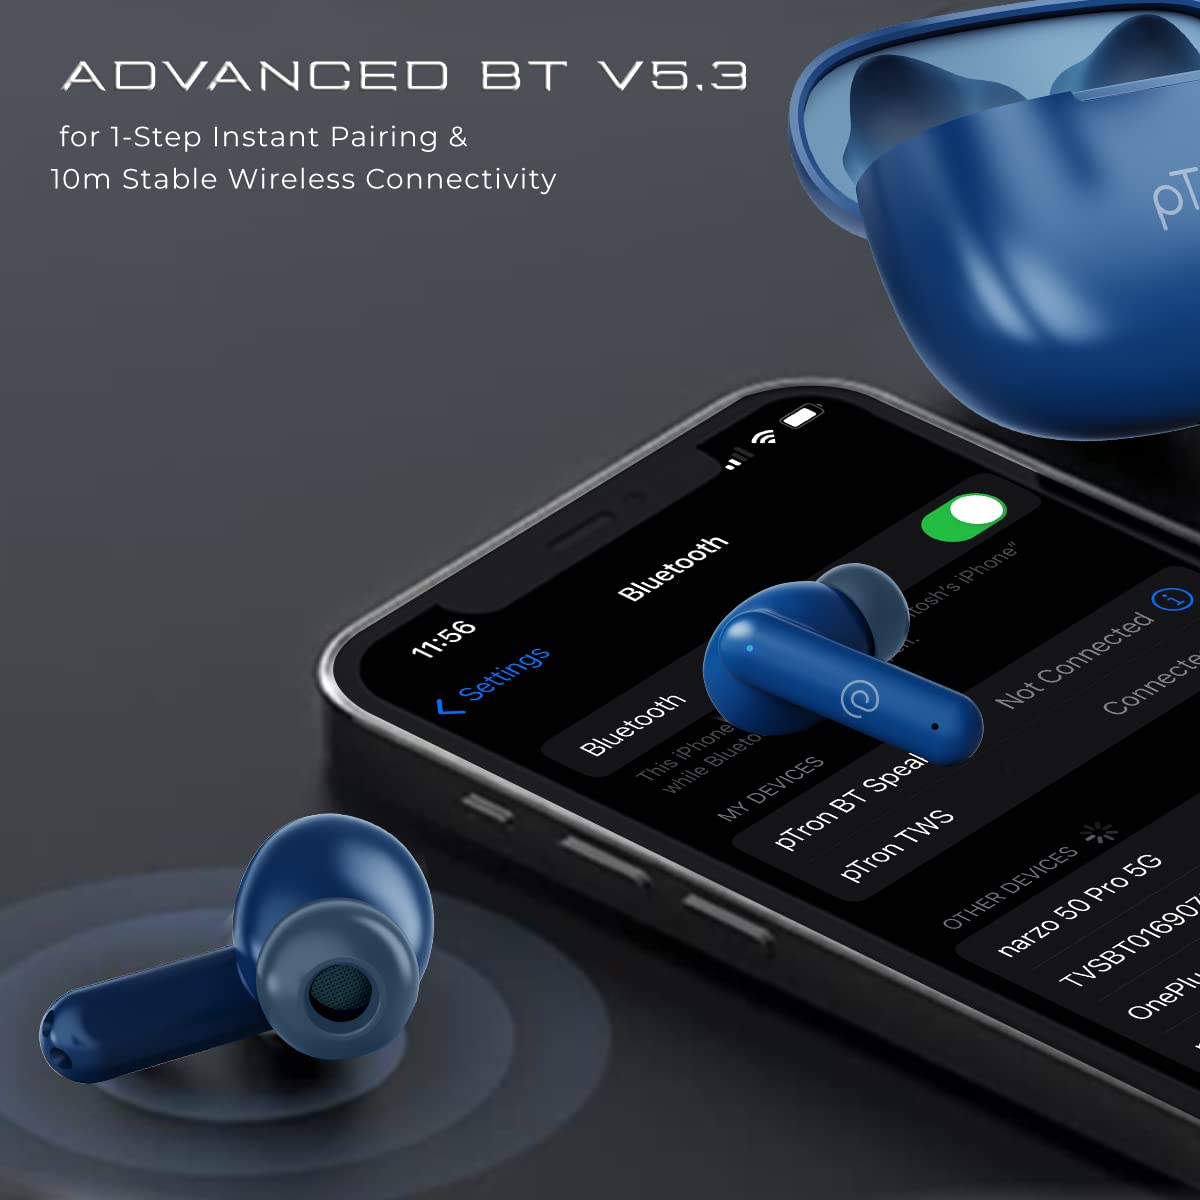 pTron Newly Launched Bassbuds Zen in-Ear TWS Earbuds with Quad ENC Mic & TruTalk™, 50Hrs Playtime, BT5.3 Headphones with Mic, Deep Bass, Low Latency, Touch Control, Type-C Fast Charging & IPX4 (Blue)